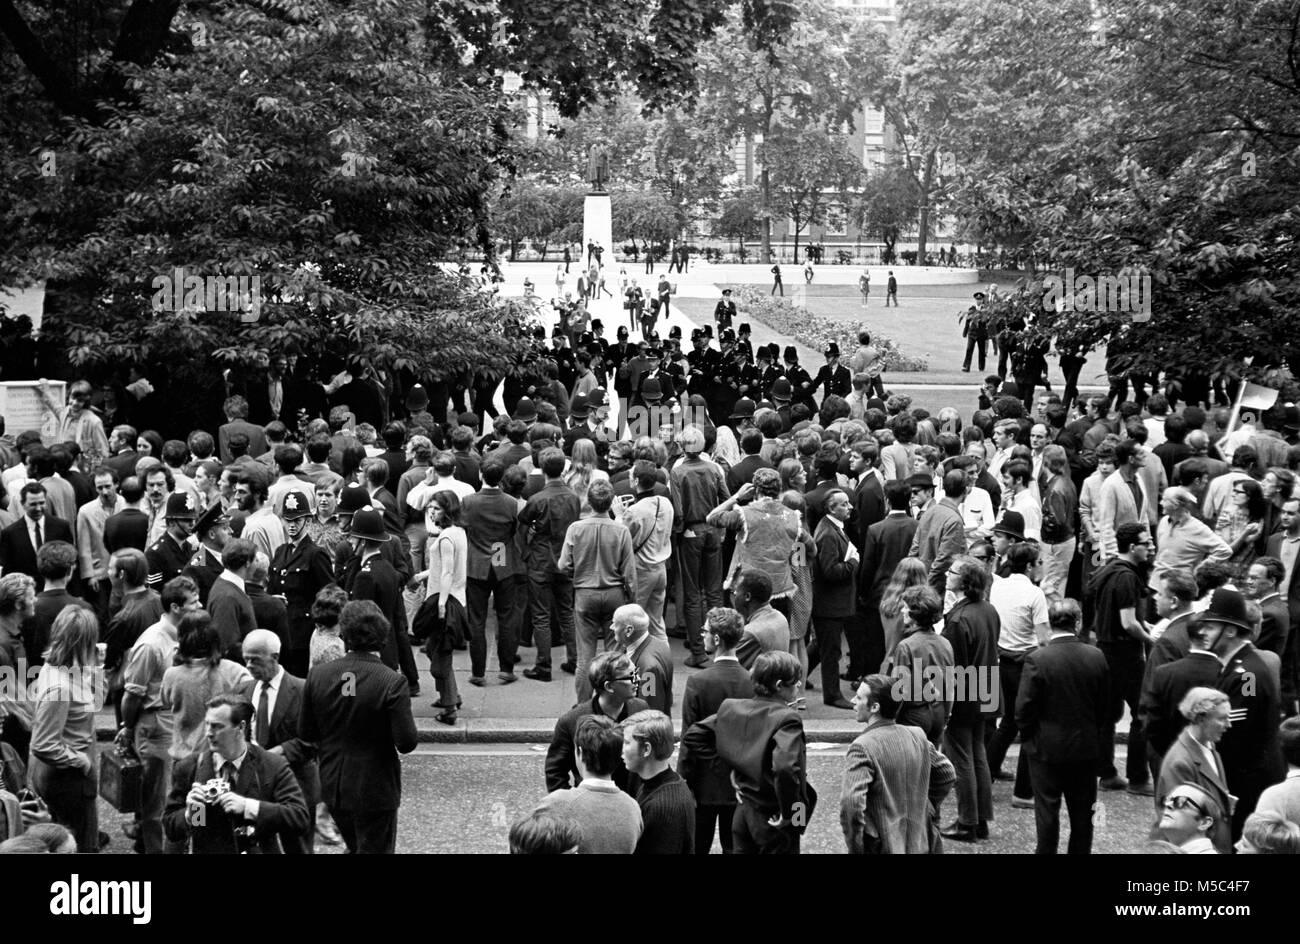 Student Protest 1960s Stock Photos & Student Protest 1960s Stock Images - Alamy